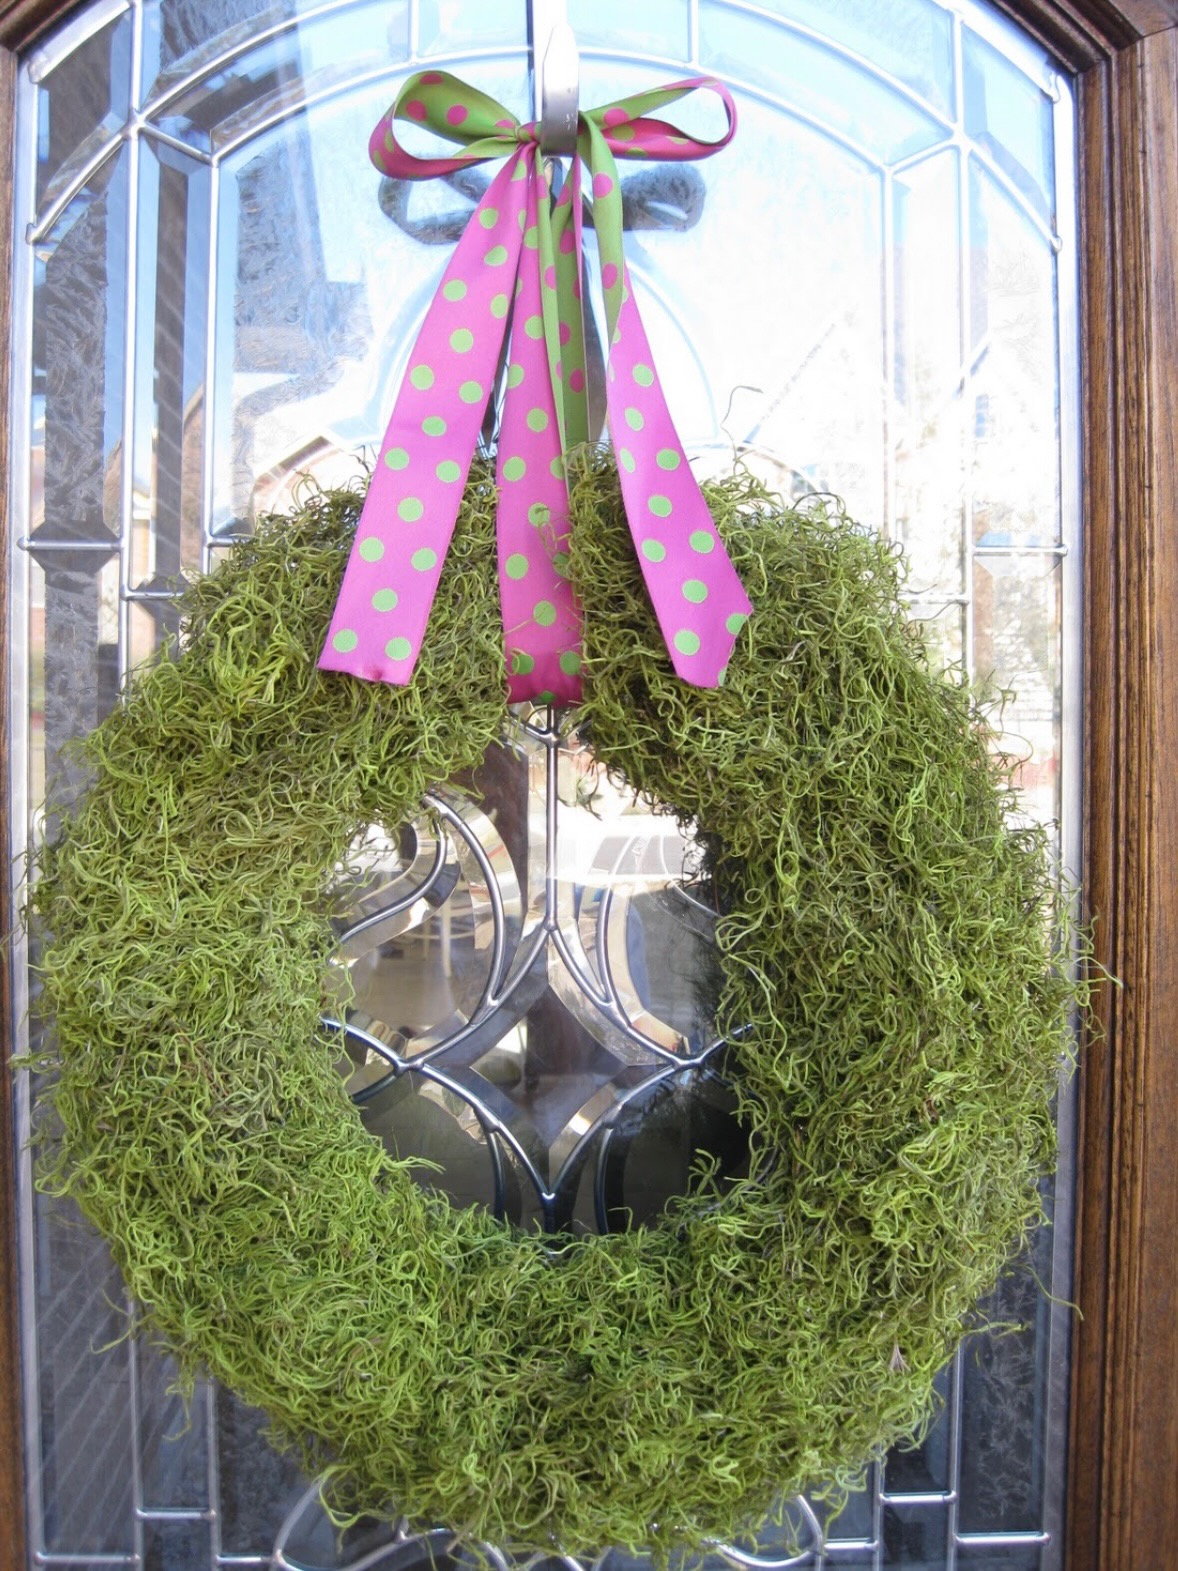 Mini Moss Wreath Gift Toppers :: Monthly DIY Challenge - BREPURPOSED